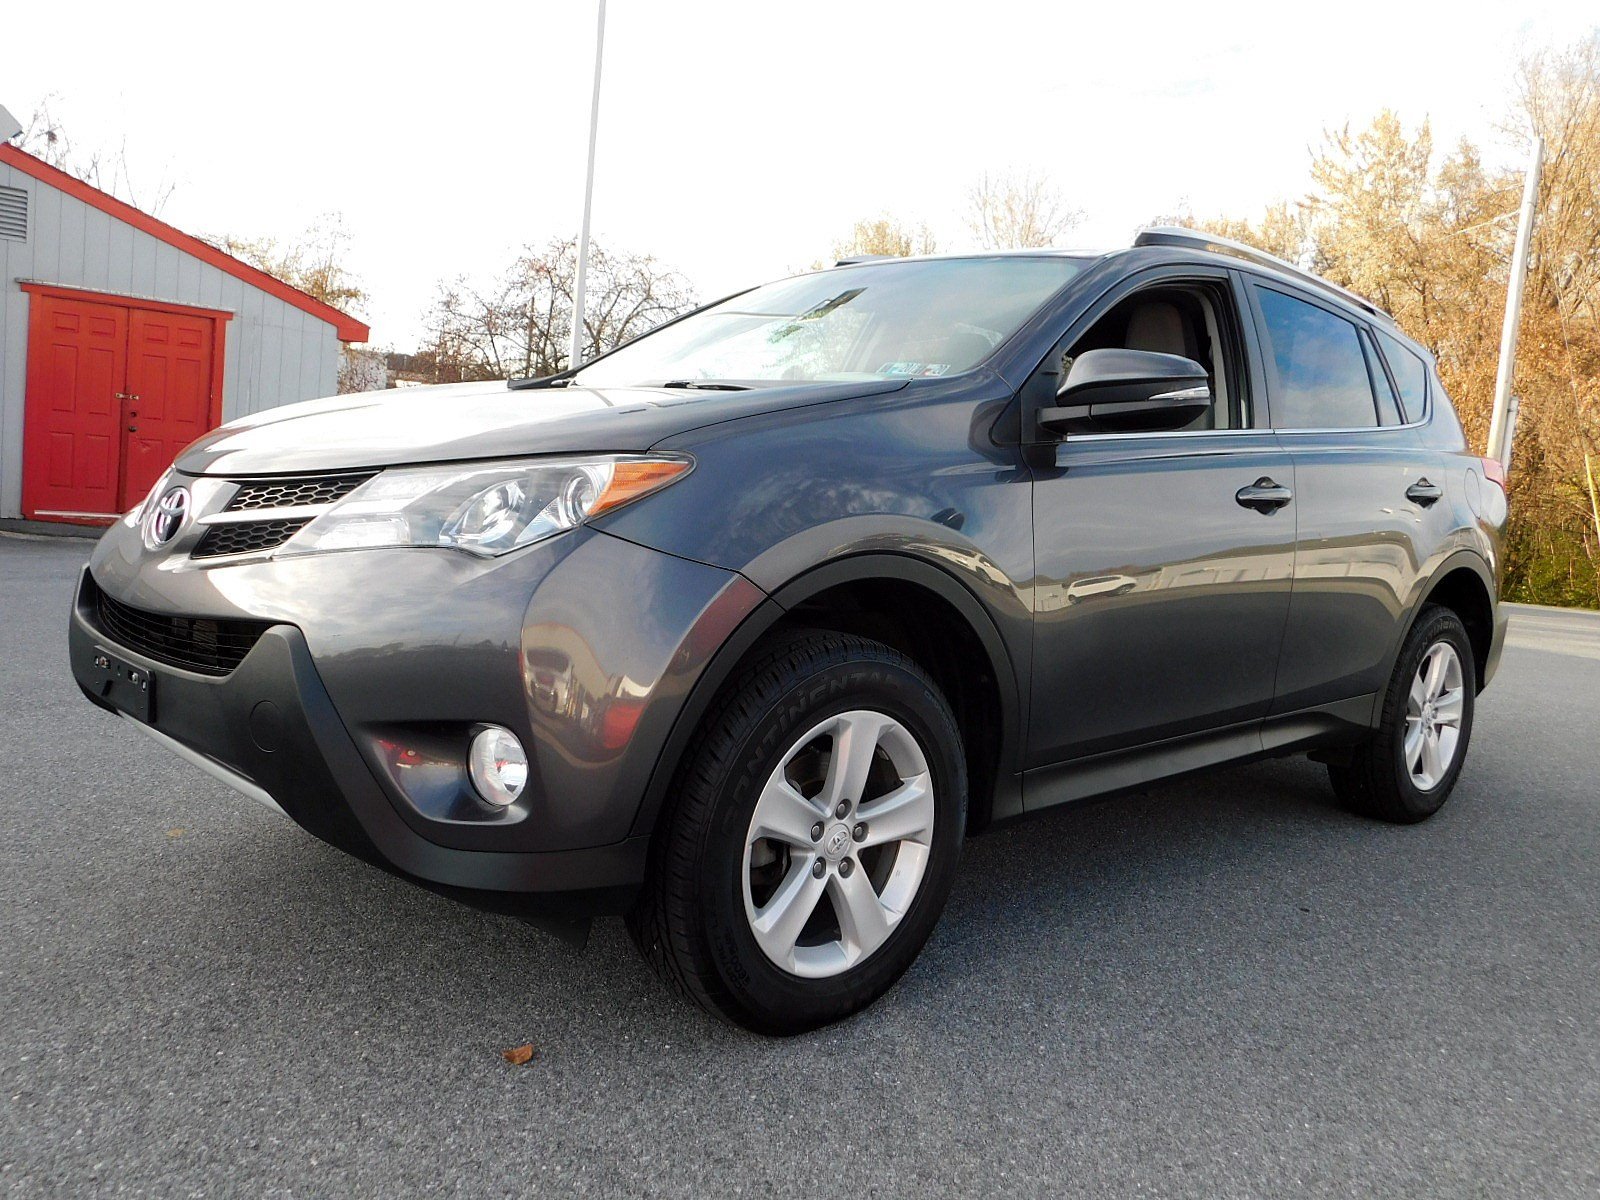 PreOwned 2014 Toyota RAV4 XLE Sport Utility in East